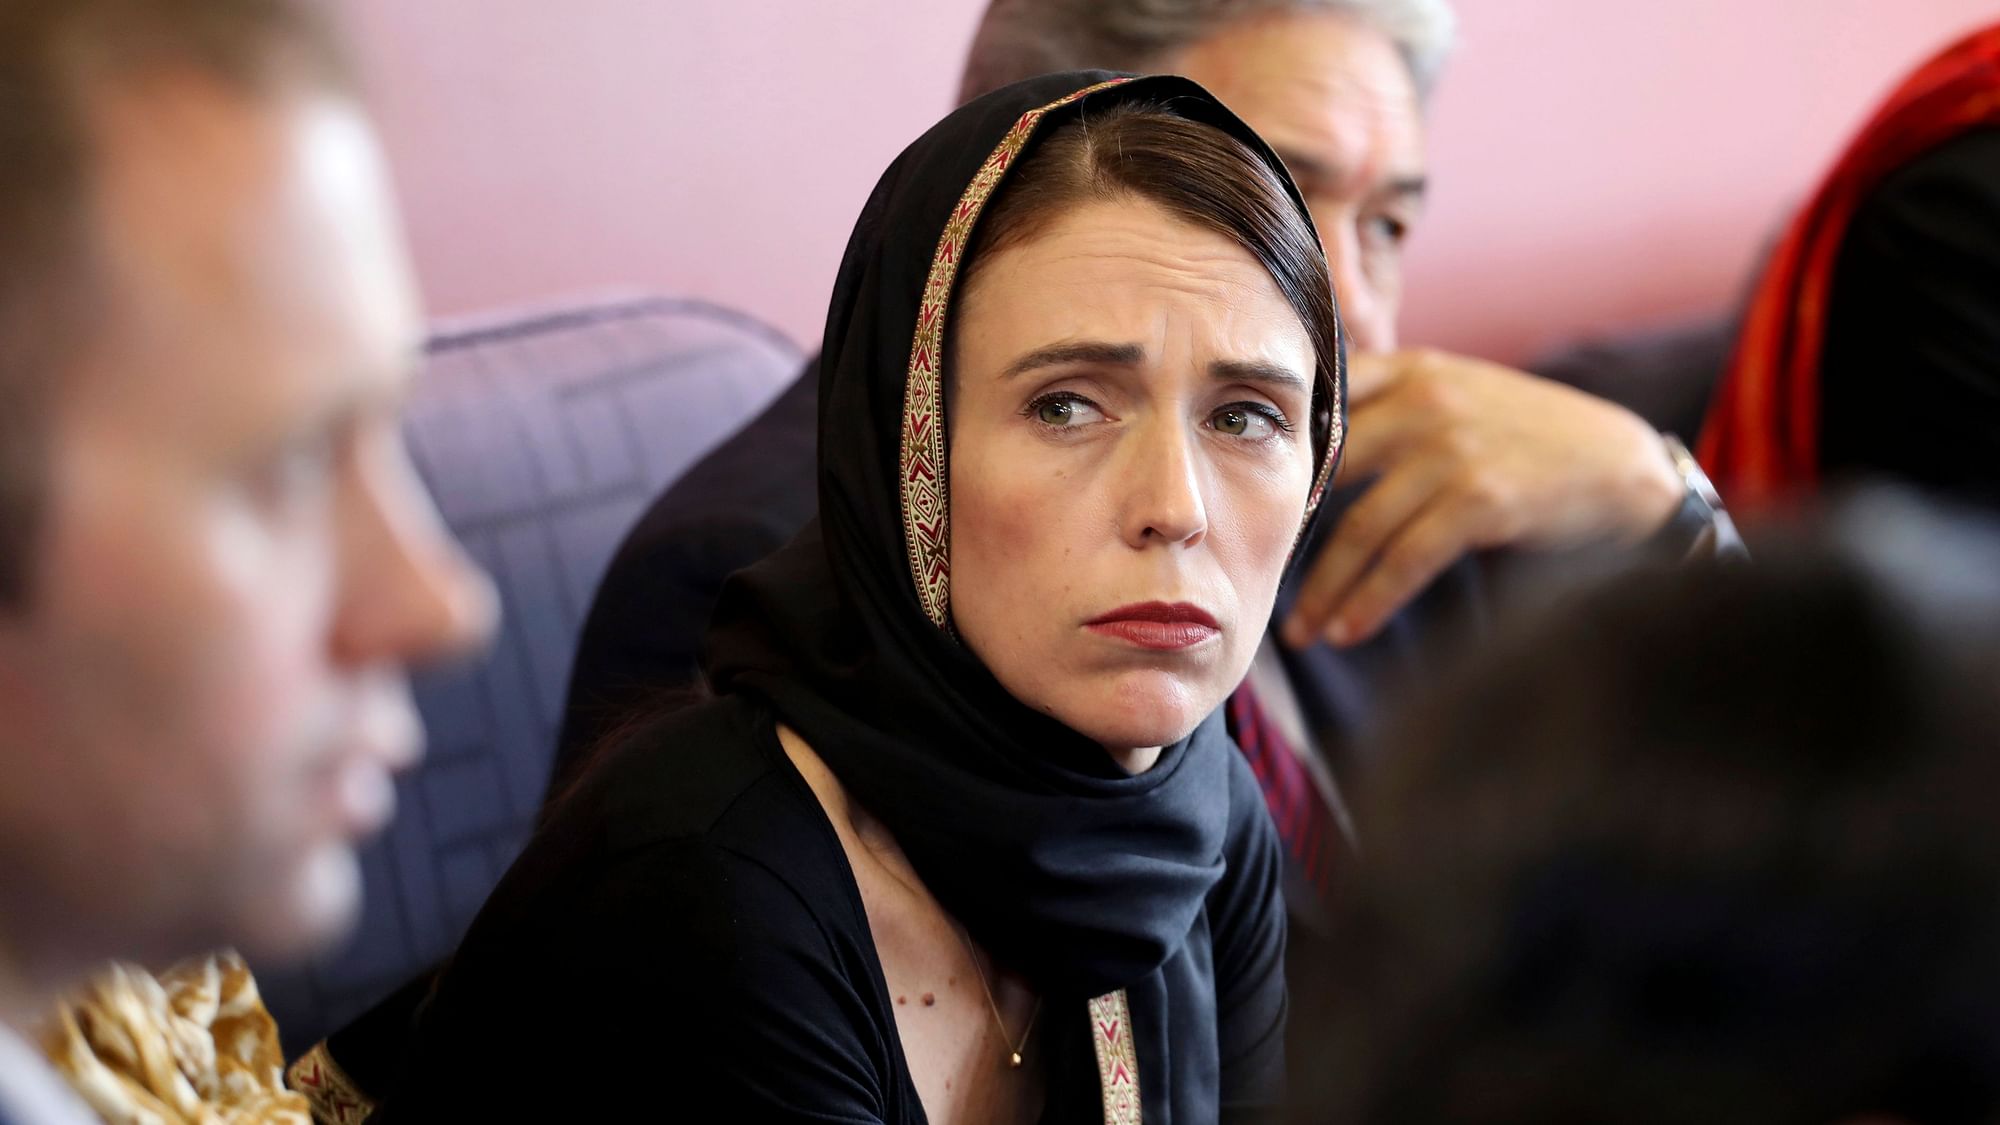 Prime Minister Jacinda Ardern meets representatives of the Muslim community, Saturday, 16 March, at the Canterbury Refugee Centre in Christchurch, New Zealand.